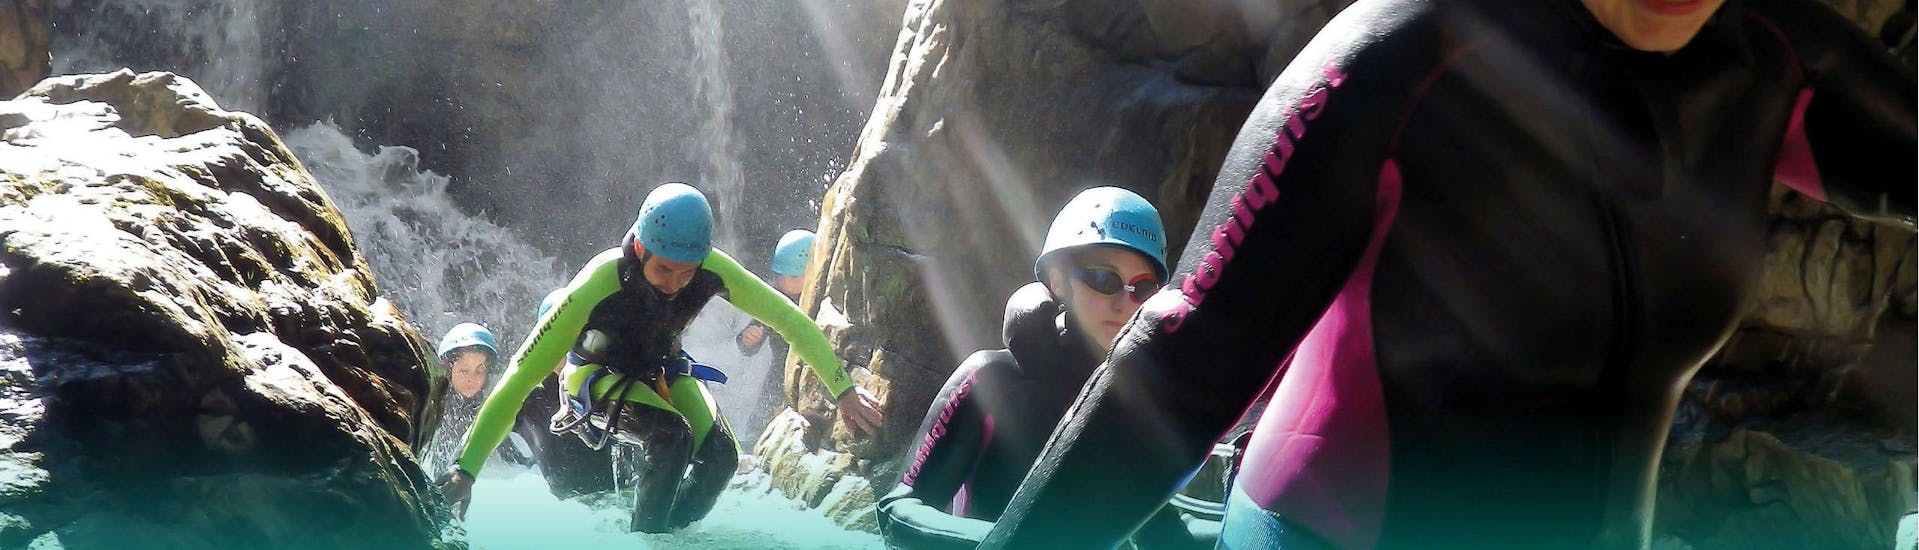 Canyoning facile à Ainet.